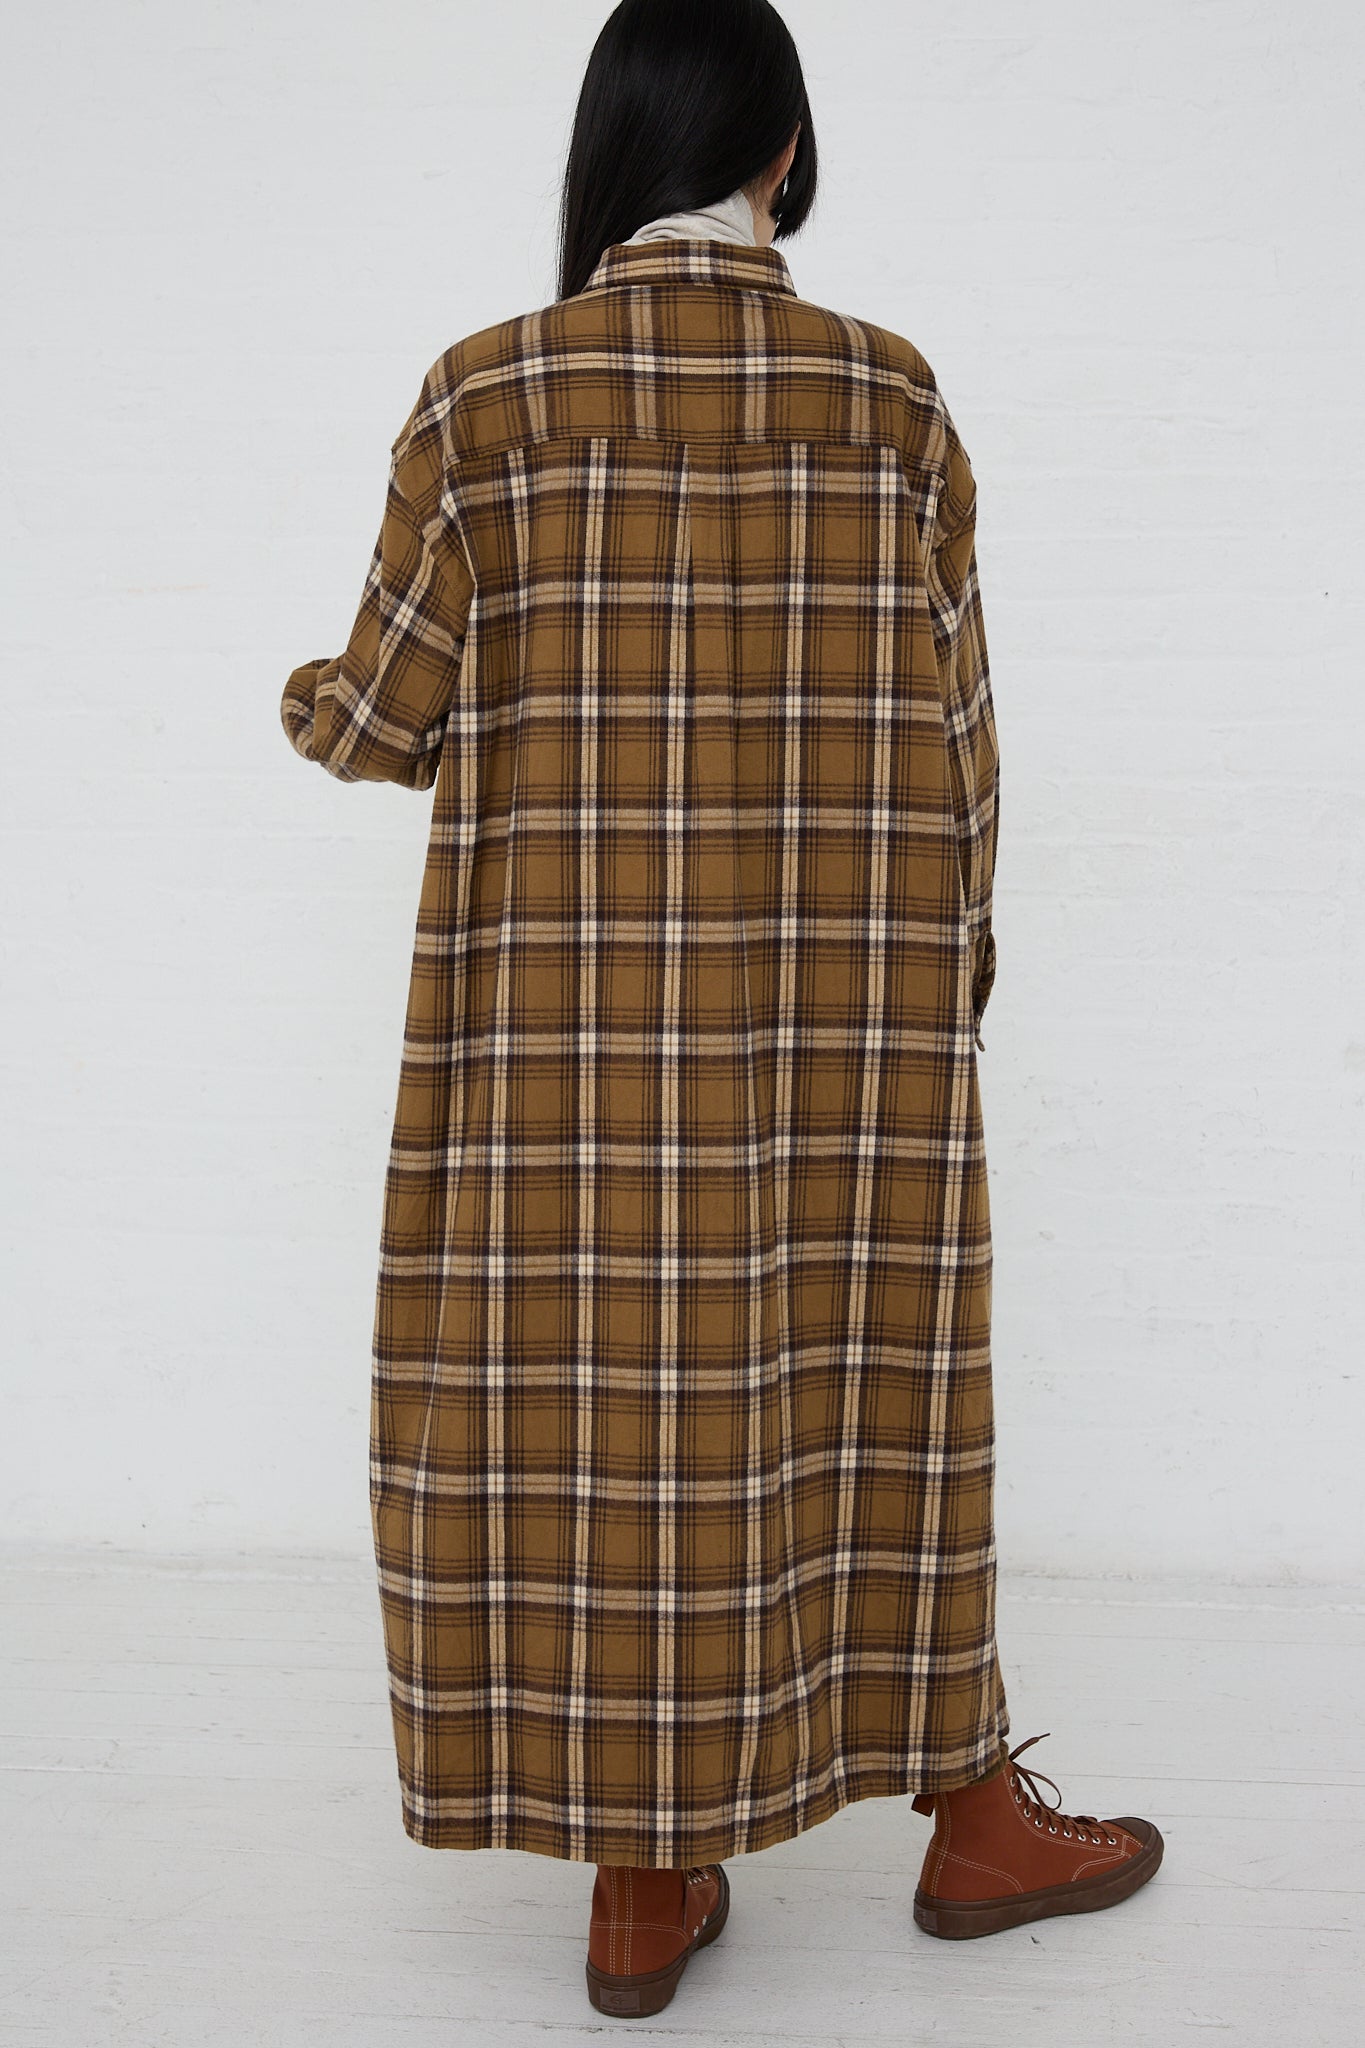 The back view of a woman wearing an Ichi Woven Cotton Dress in Camel made with woven plaid cotton.